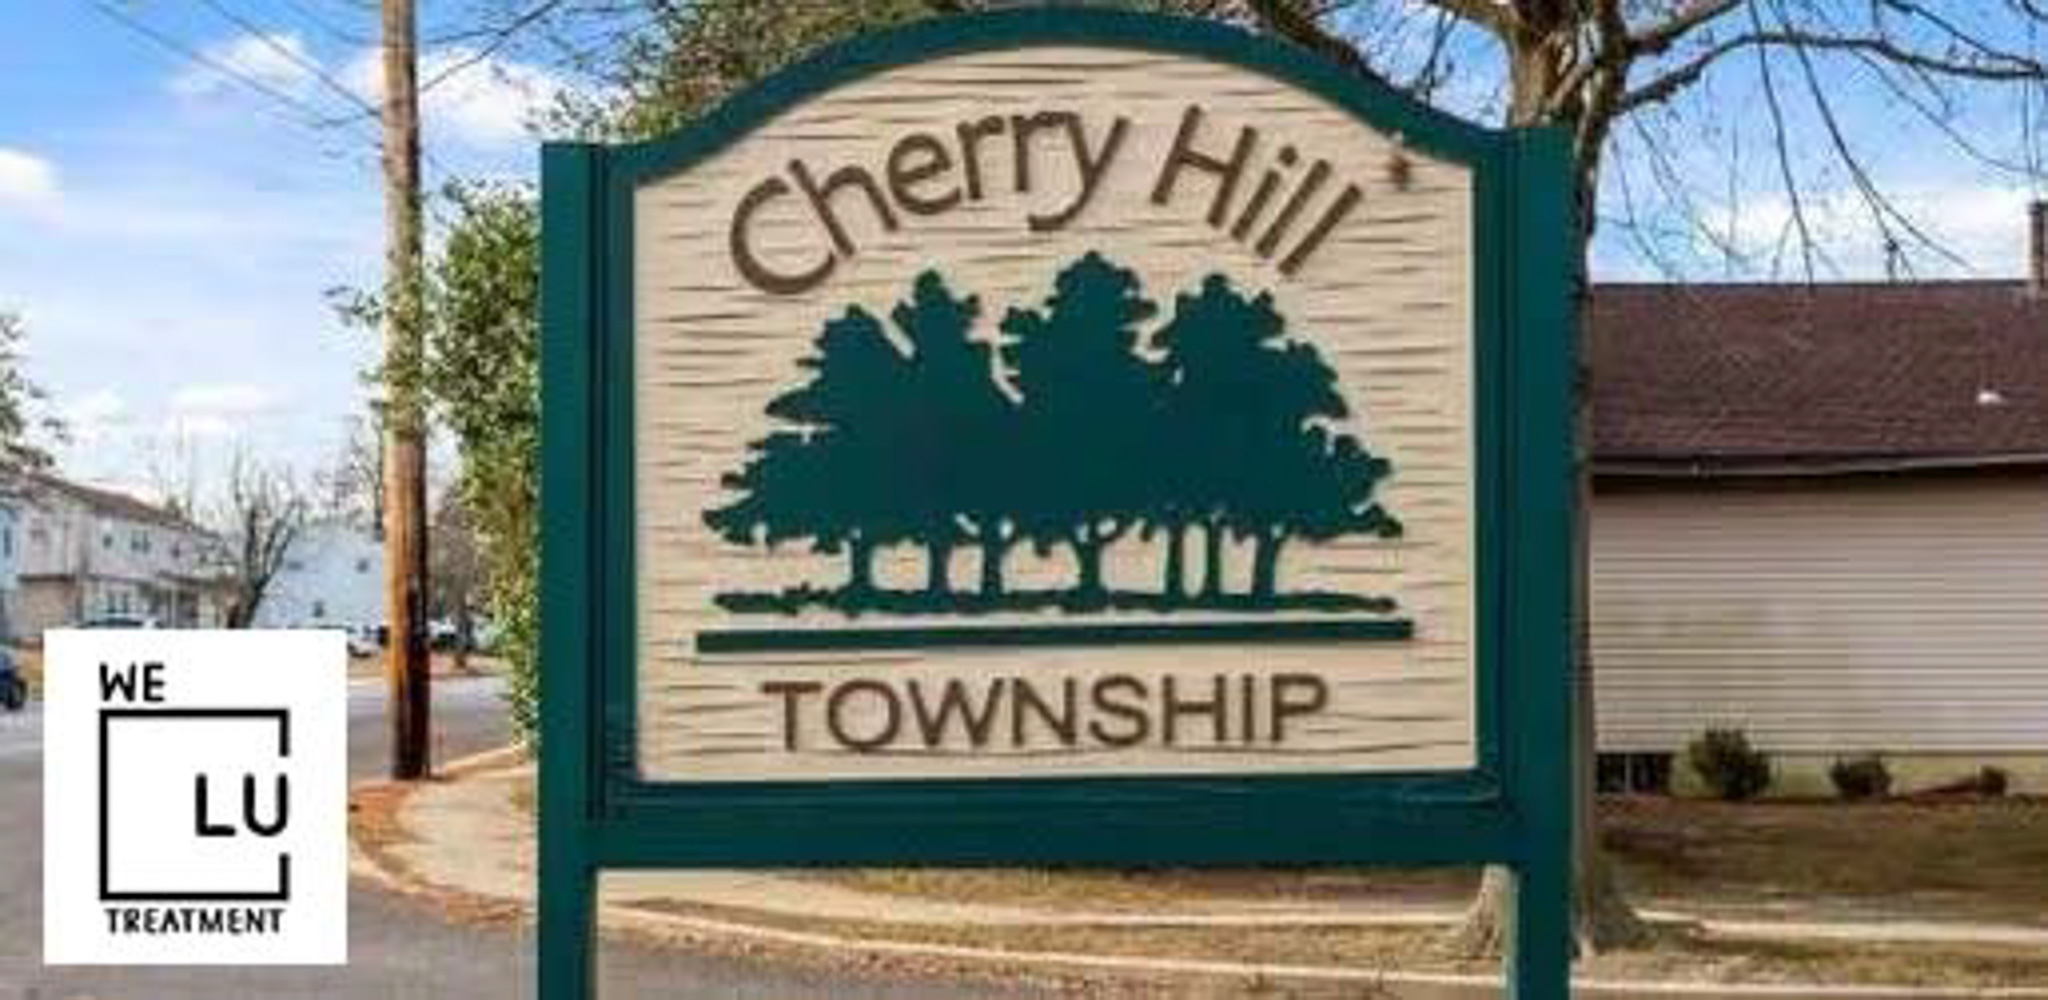 There are multiple Cherry Hill rehab options. But keep in mind that not all Cherry Hill rehabs are accredited.